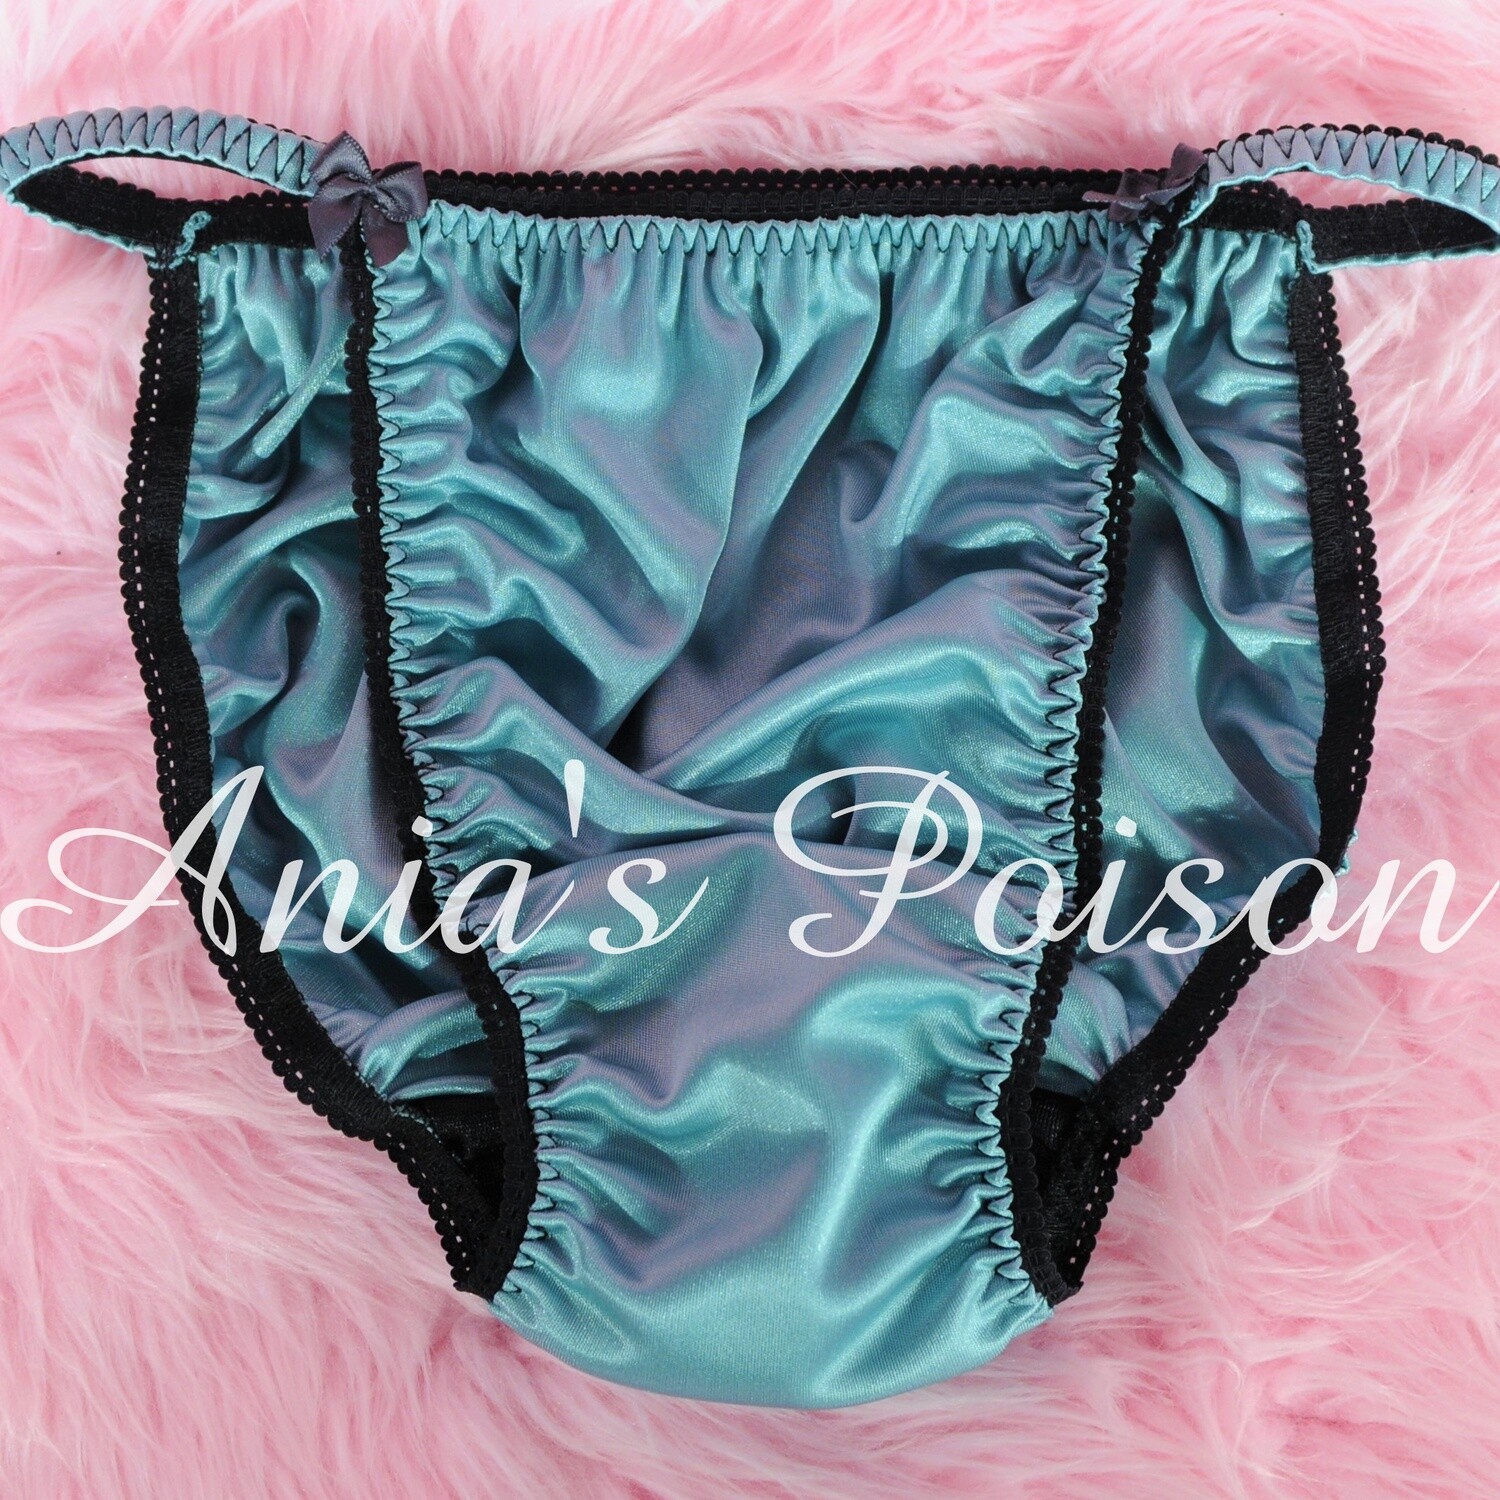 Ania's Poison MANties S - XL shiny Rare Butter Blue Green Soft Collection polyester string bikini sissy mens underwear panties